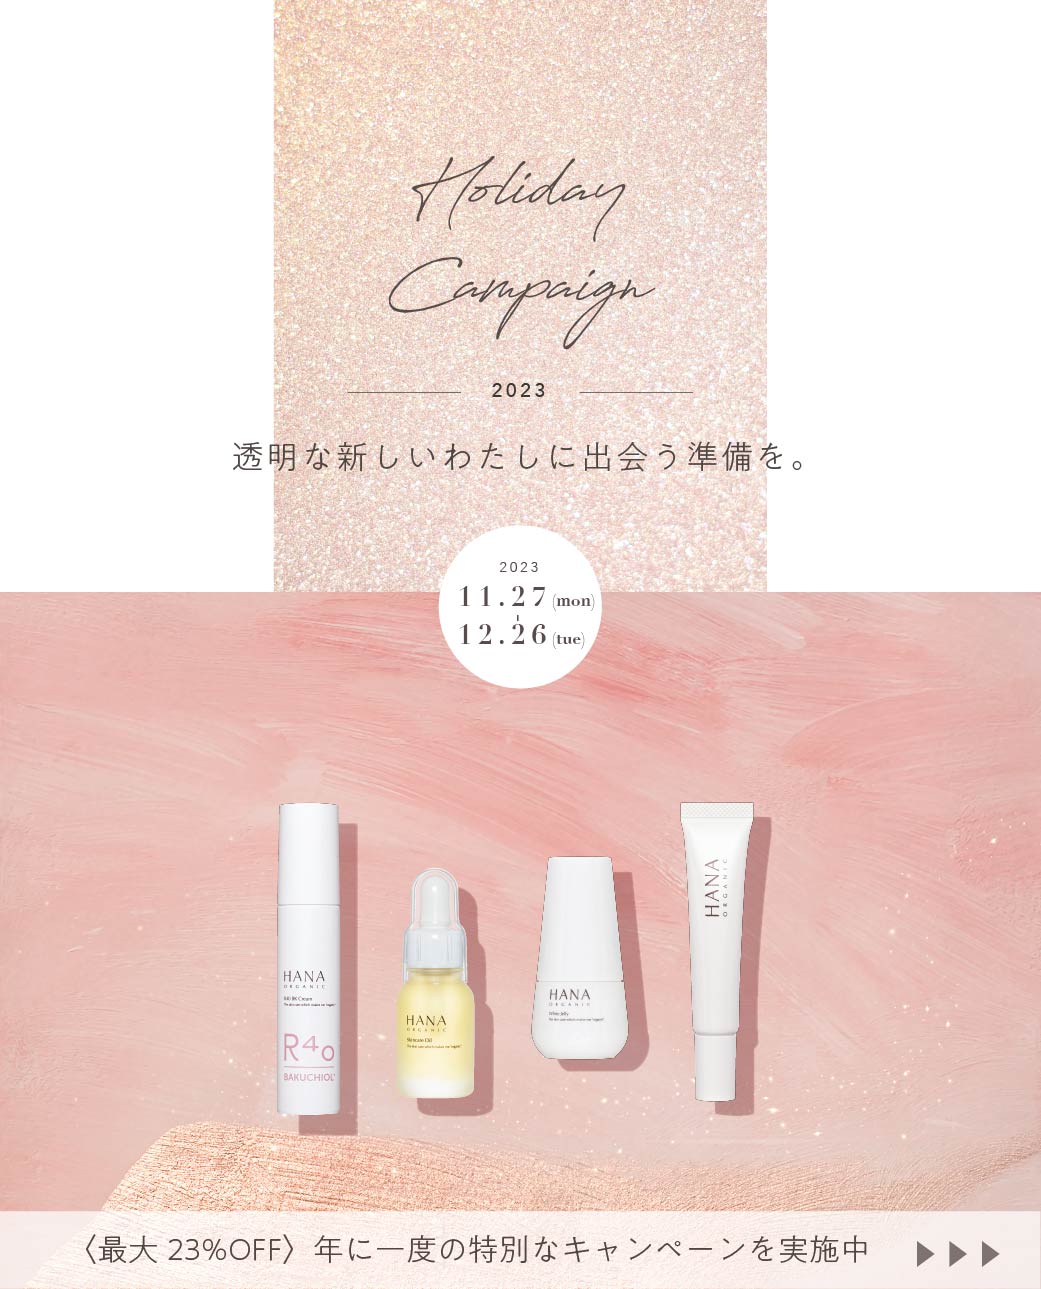 HOLIDAY CAMPAIGN 開催中！